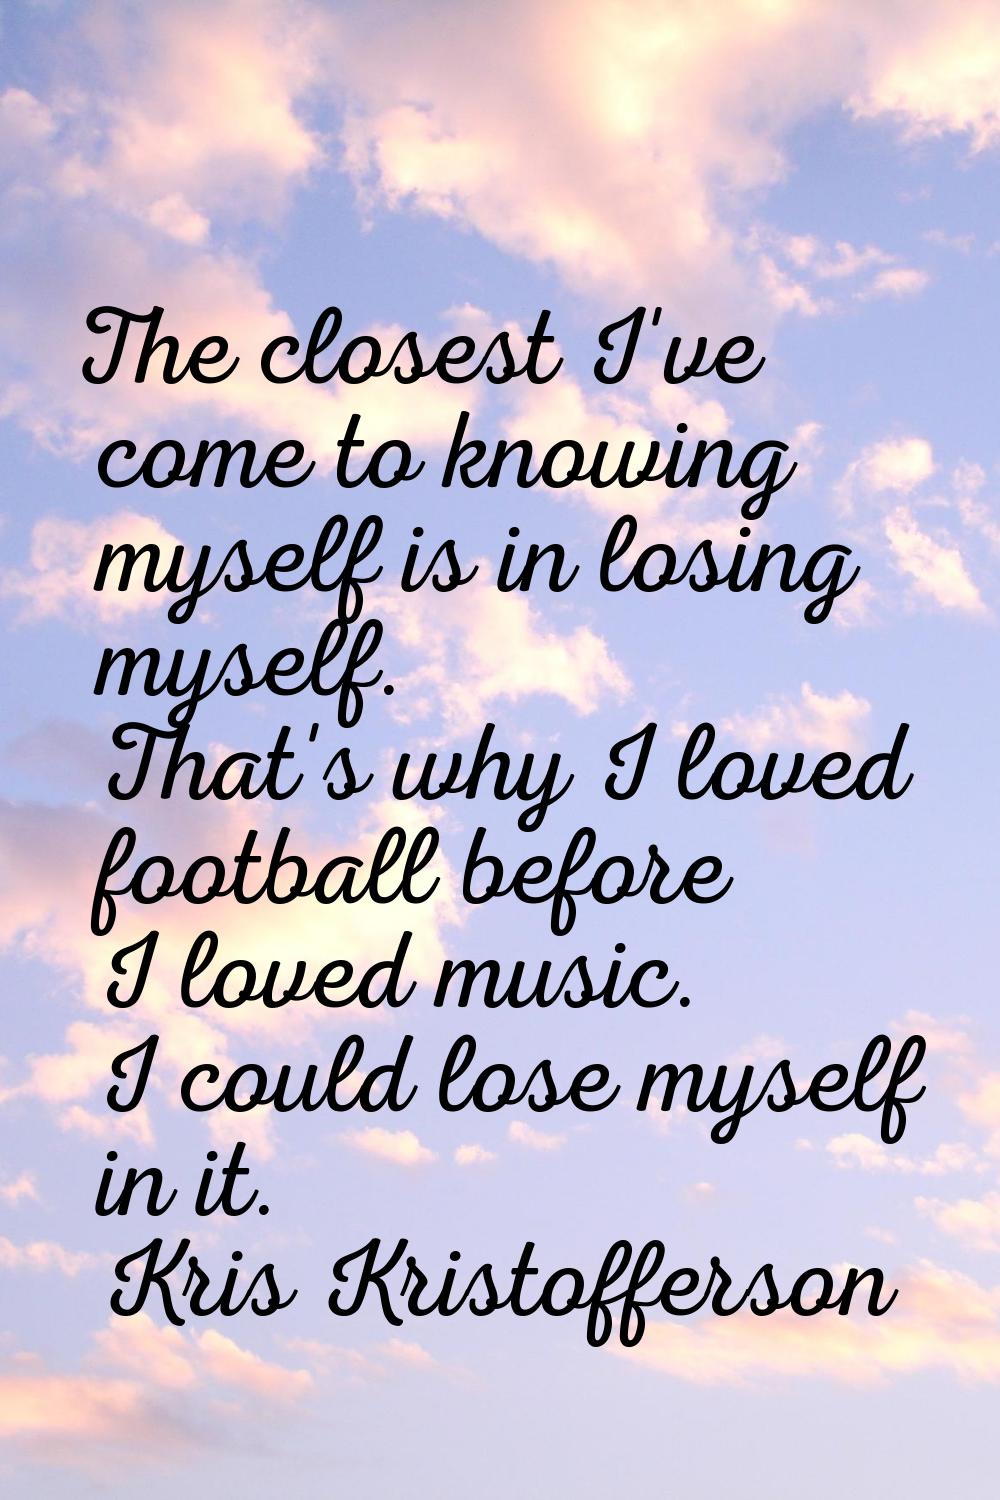 The closest I've come to knowing myself is in losing myself. That's why I loved football before I l